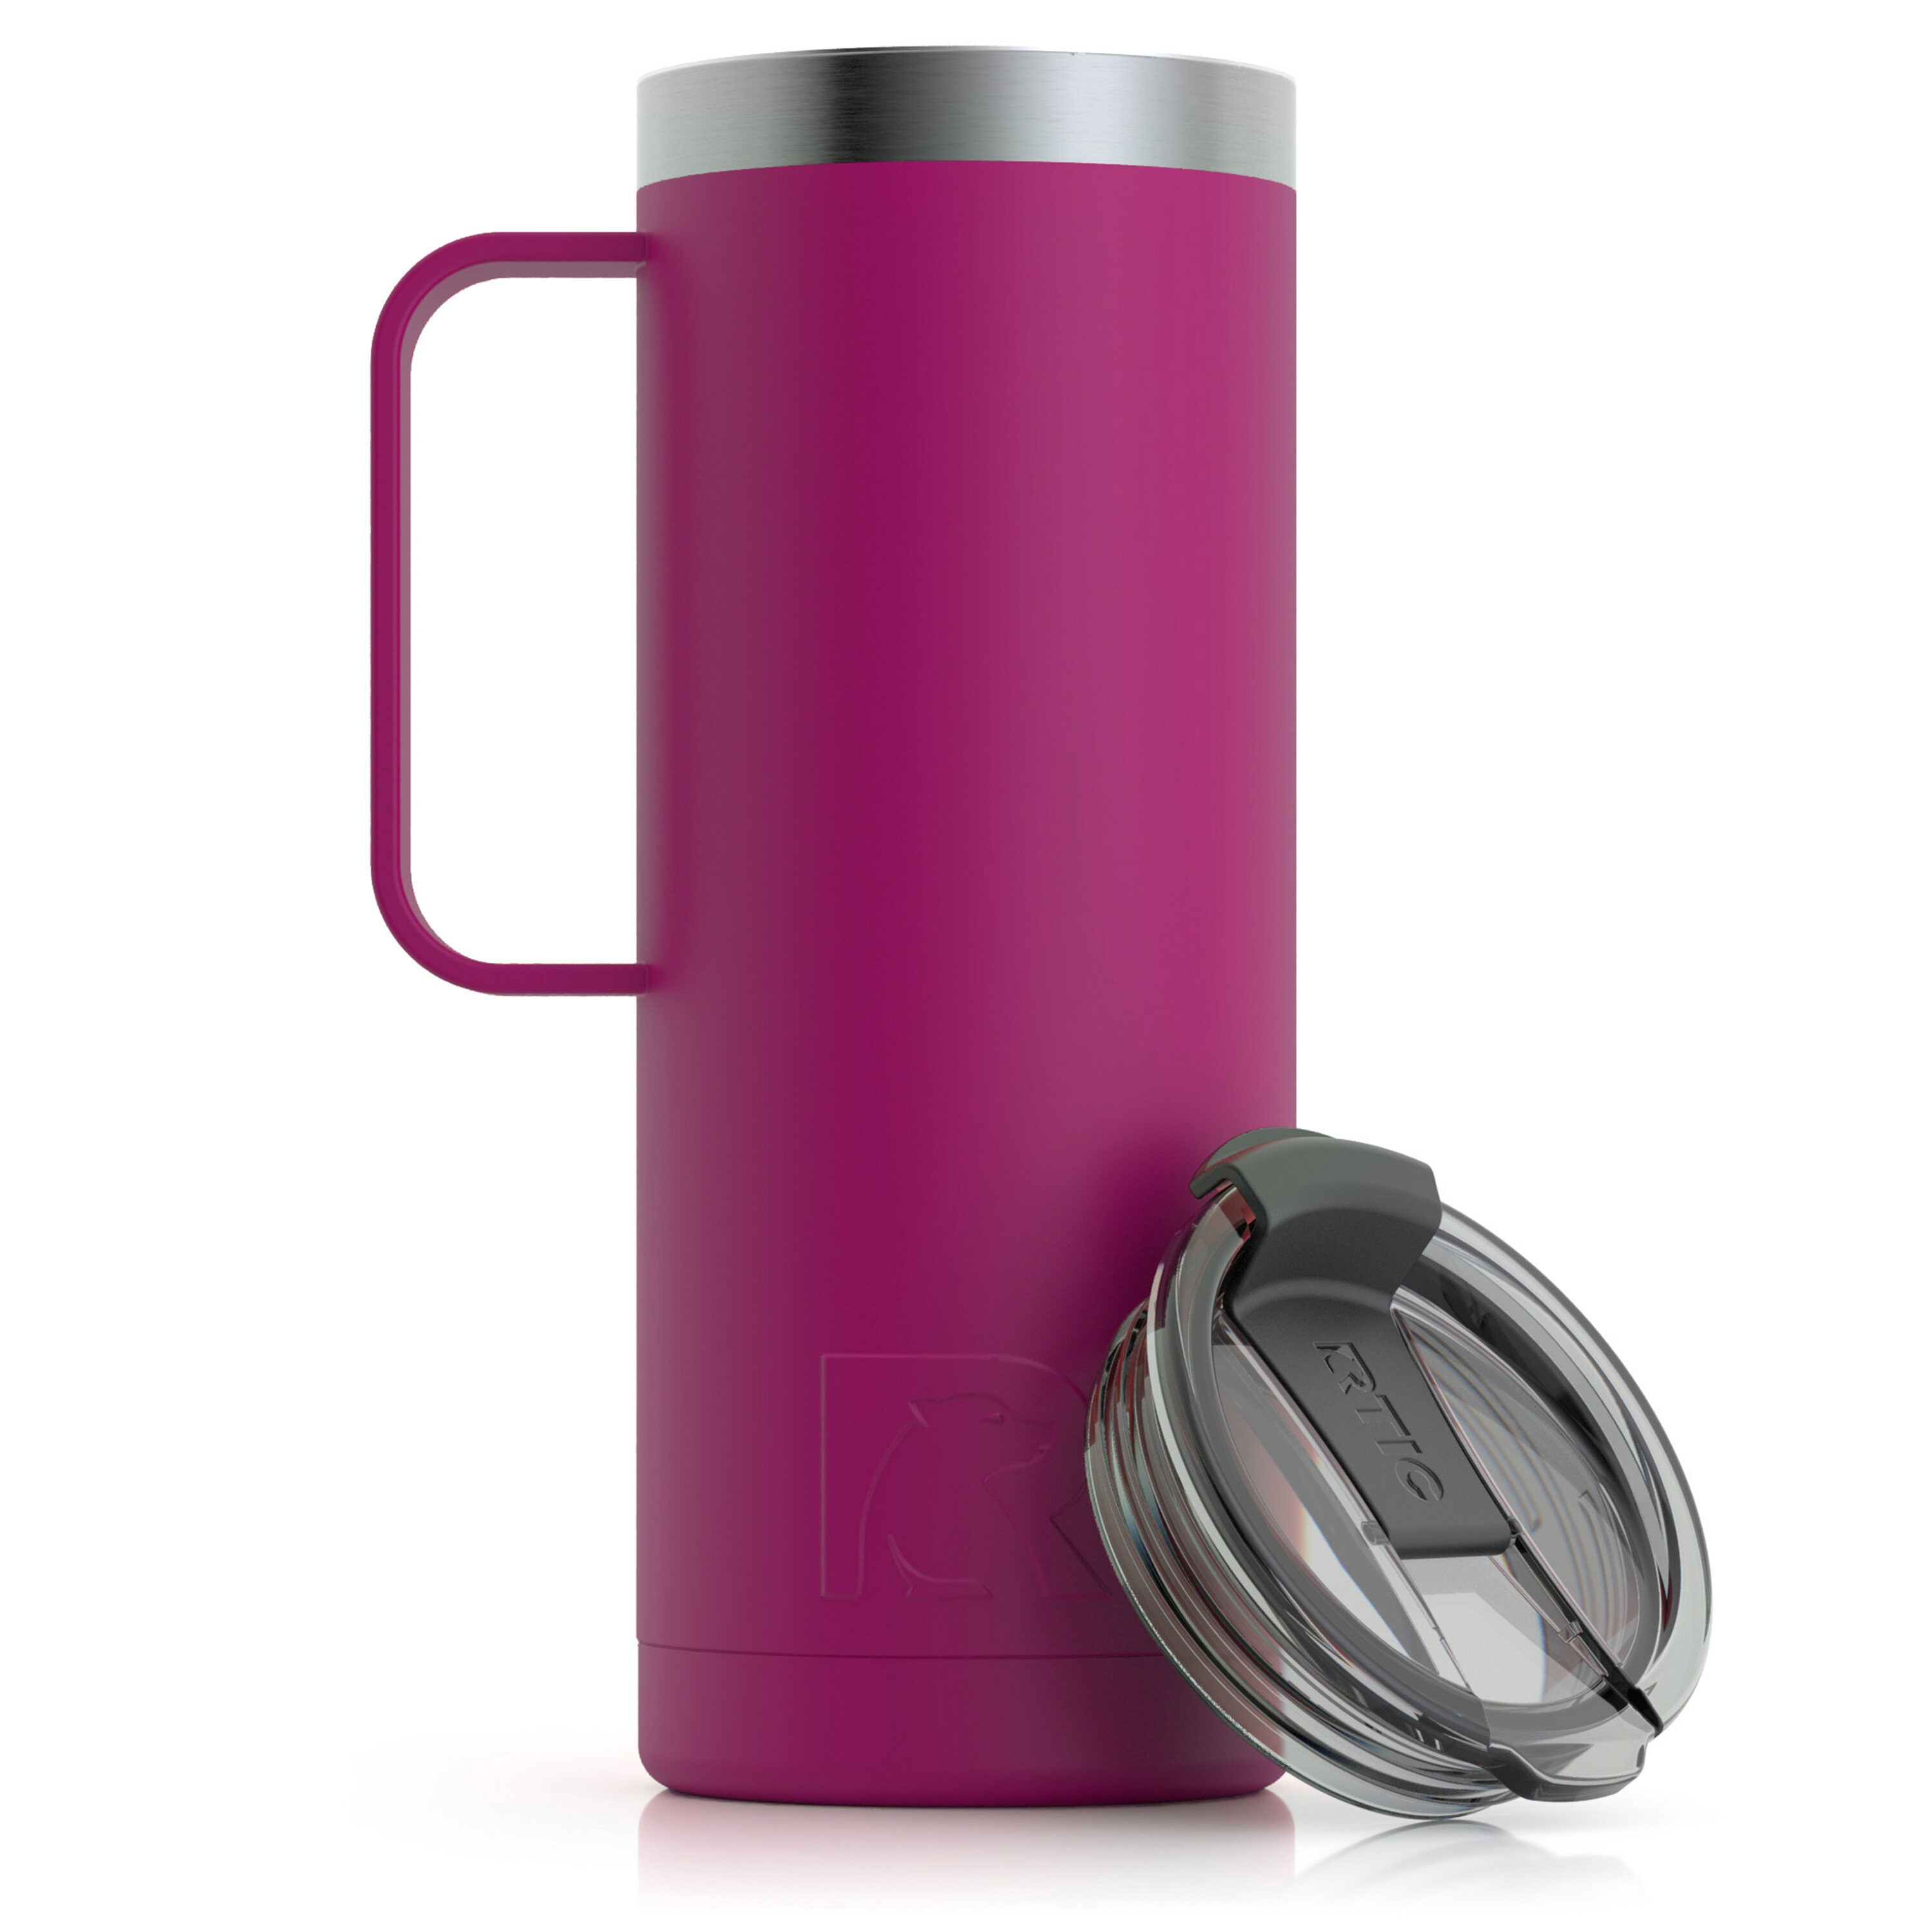 RTIC Outdoors Tumbler 20-fl oz Stainless Steel Insulated Tumbler in Pink | 18058